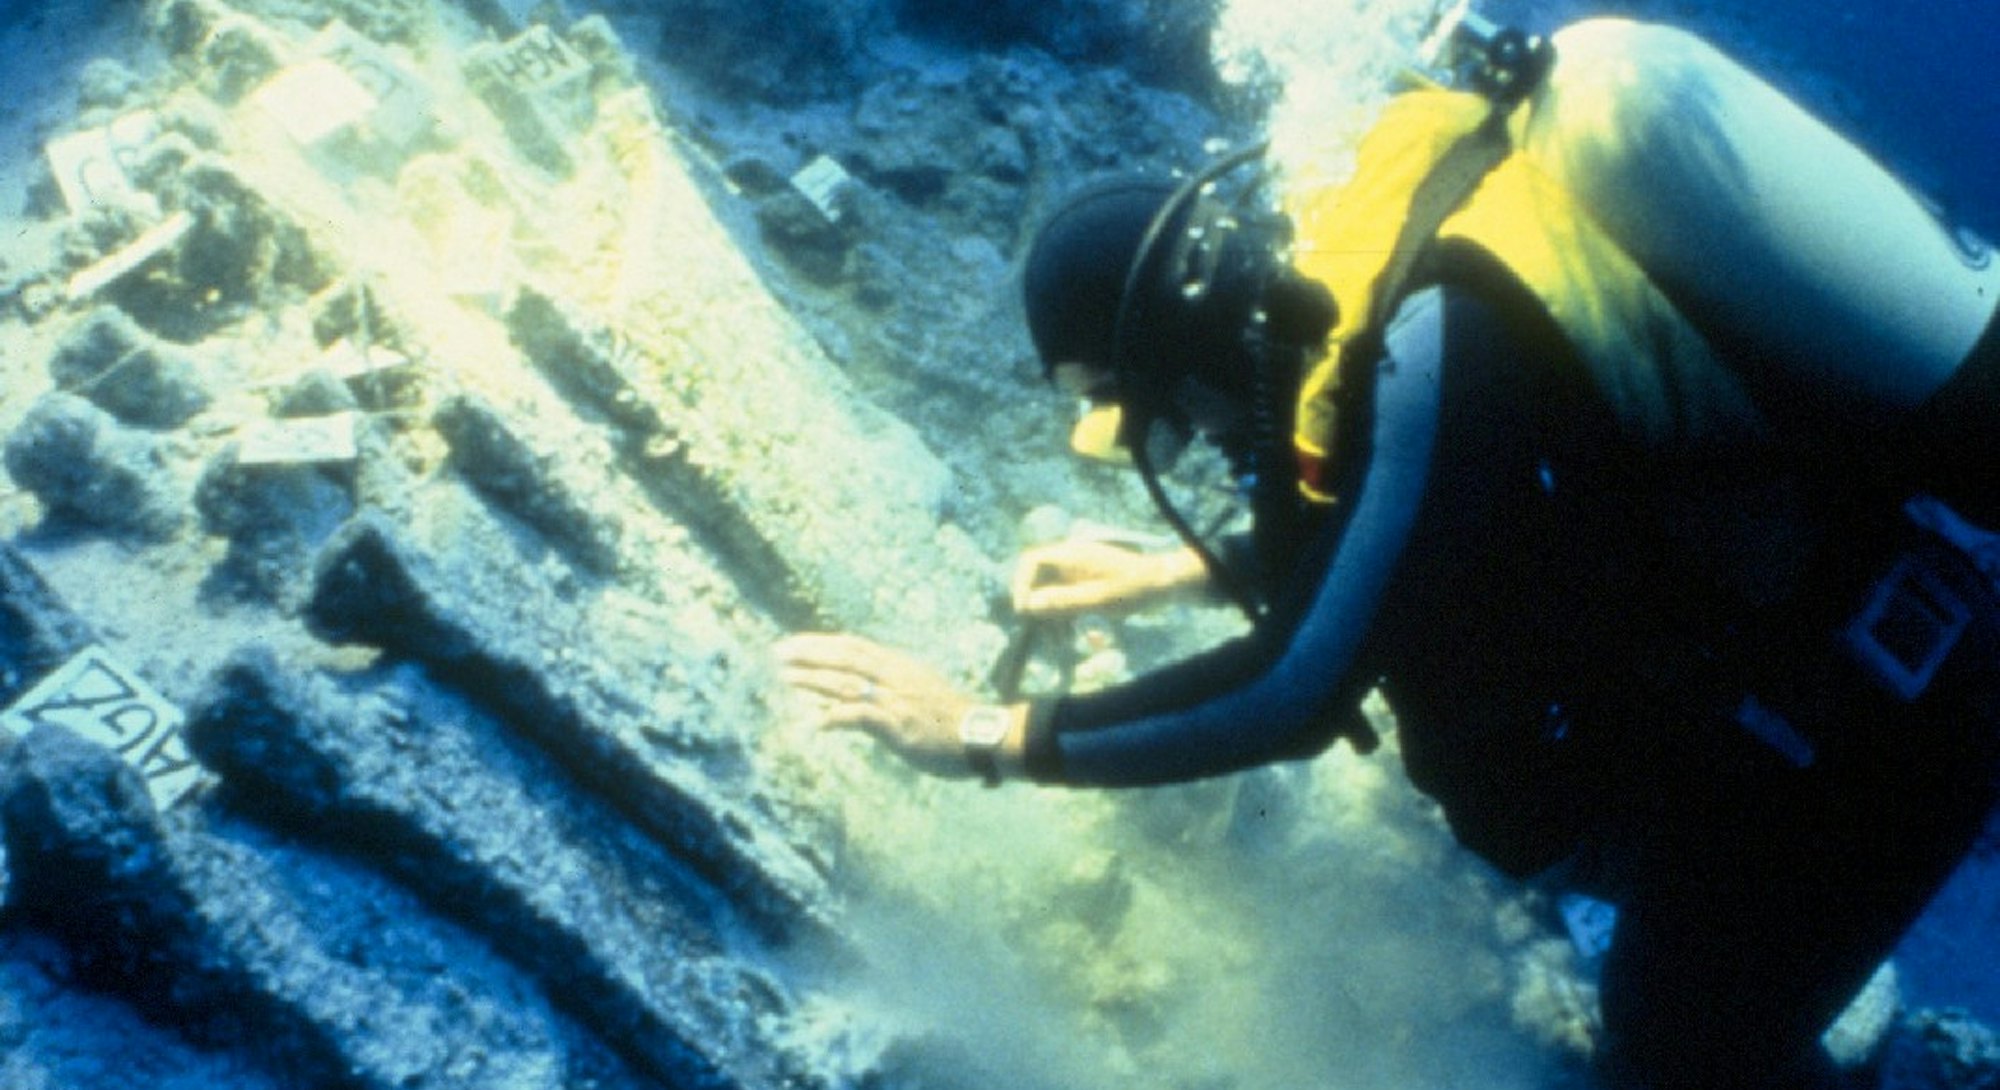 photo of diver from Uluburun shipwreck excavation